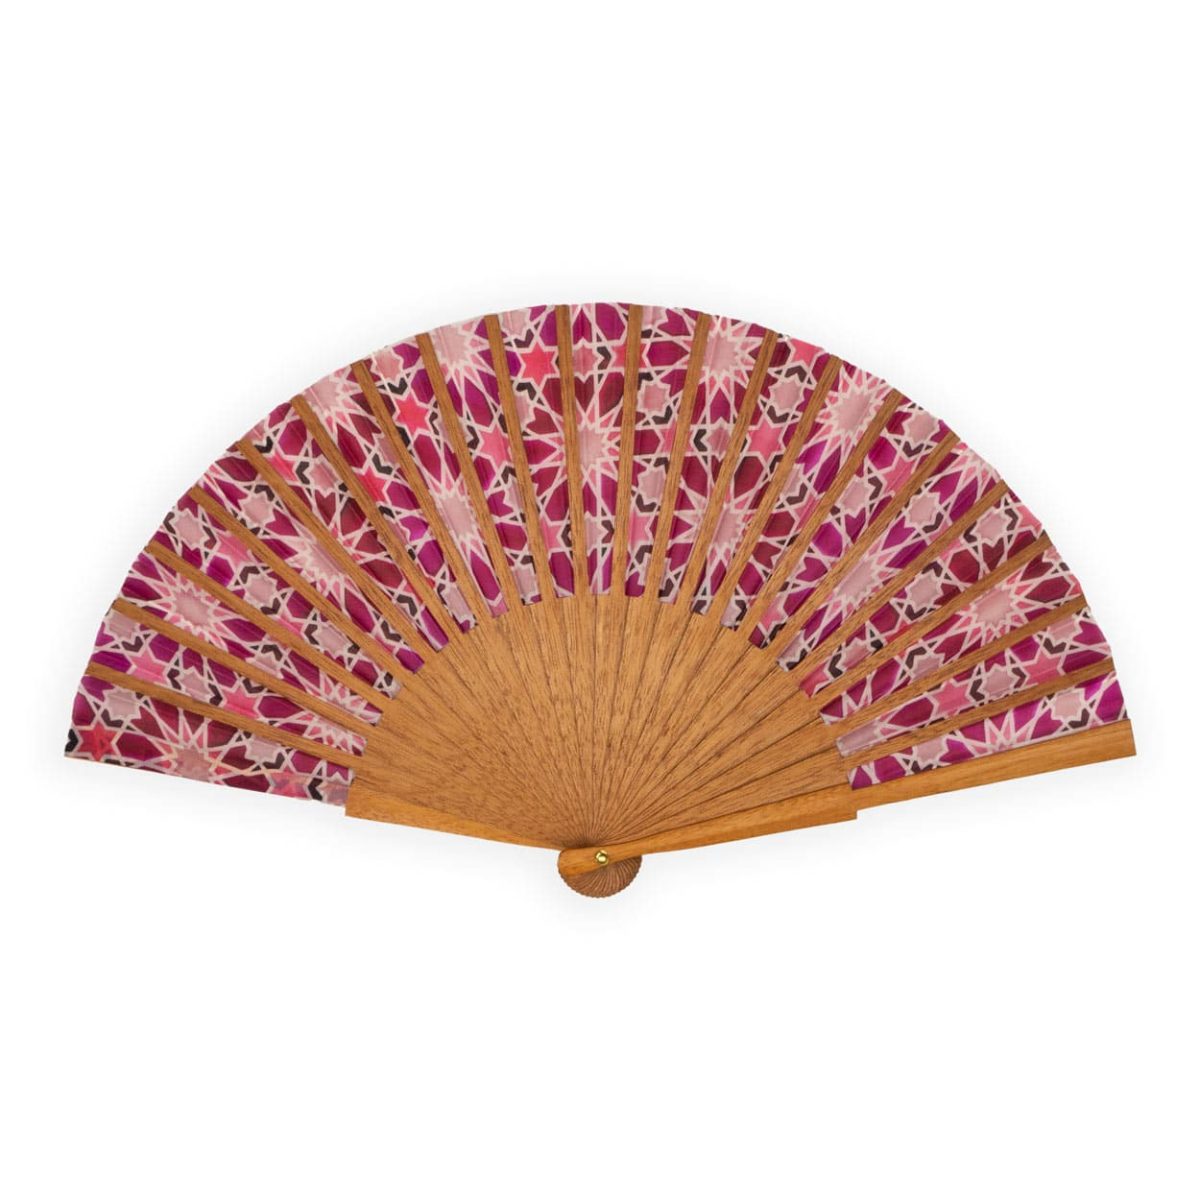 Pink folding fan inspired by moroccan tiles